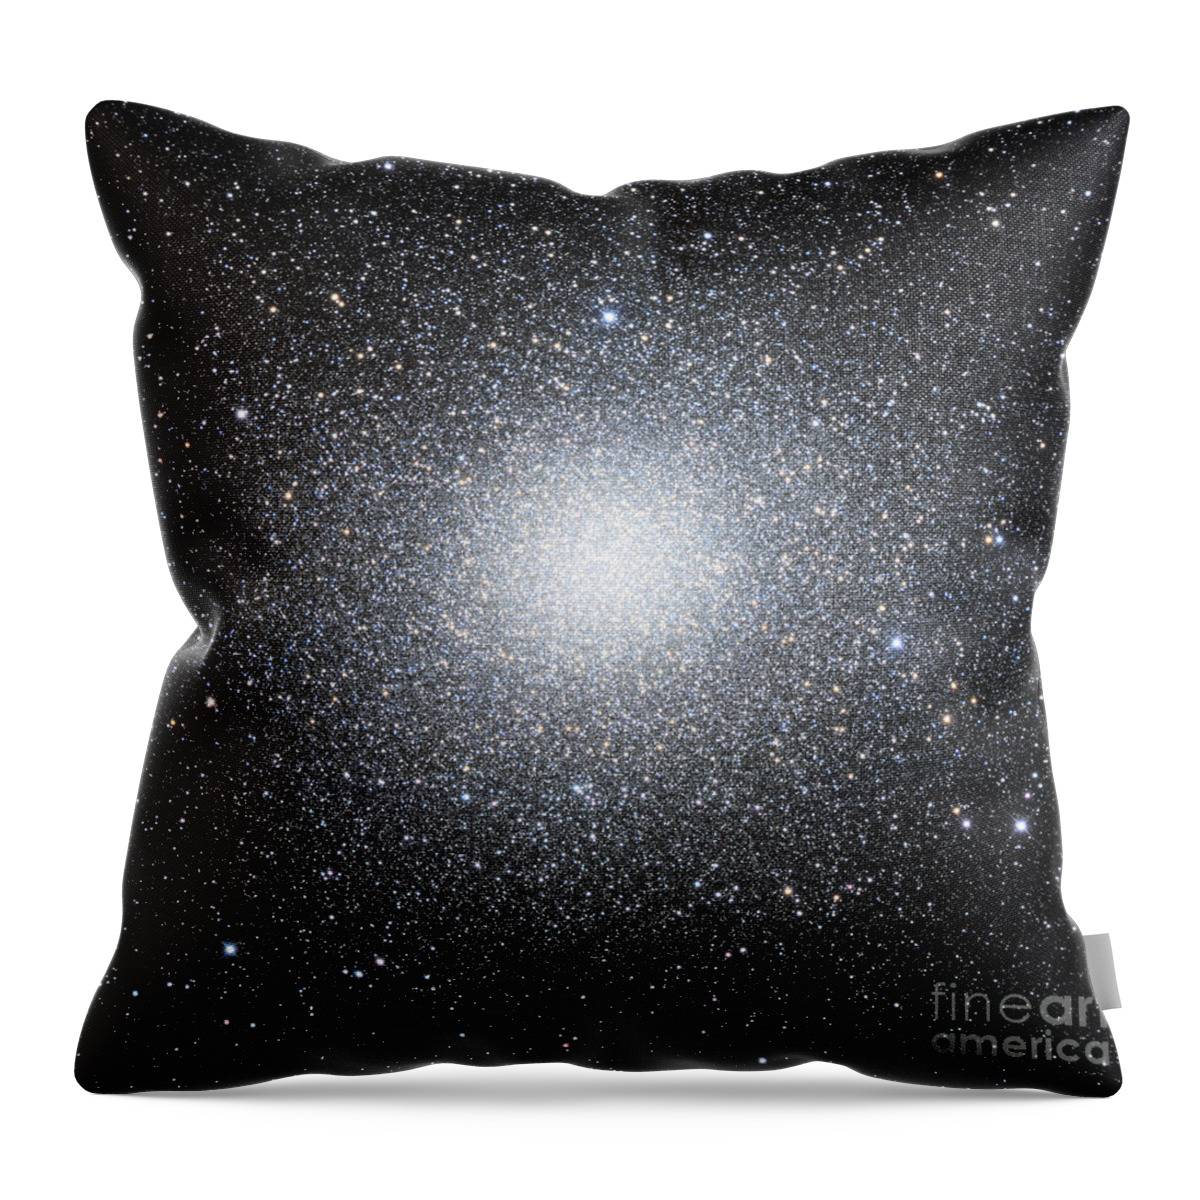 Astronomy Throw Pillow featuring the photograph Omega Centauri Or Ngc 5139 by Robert Gendler